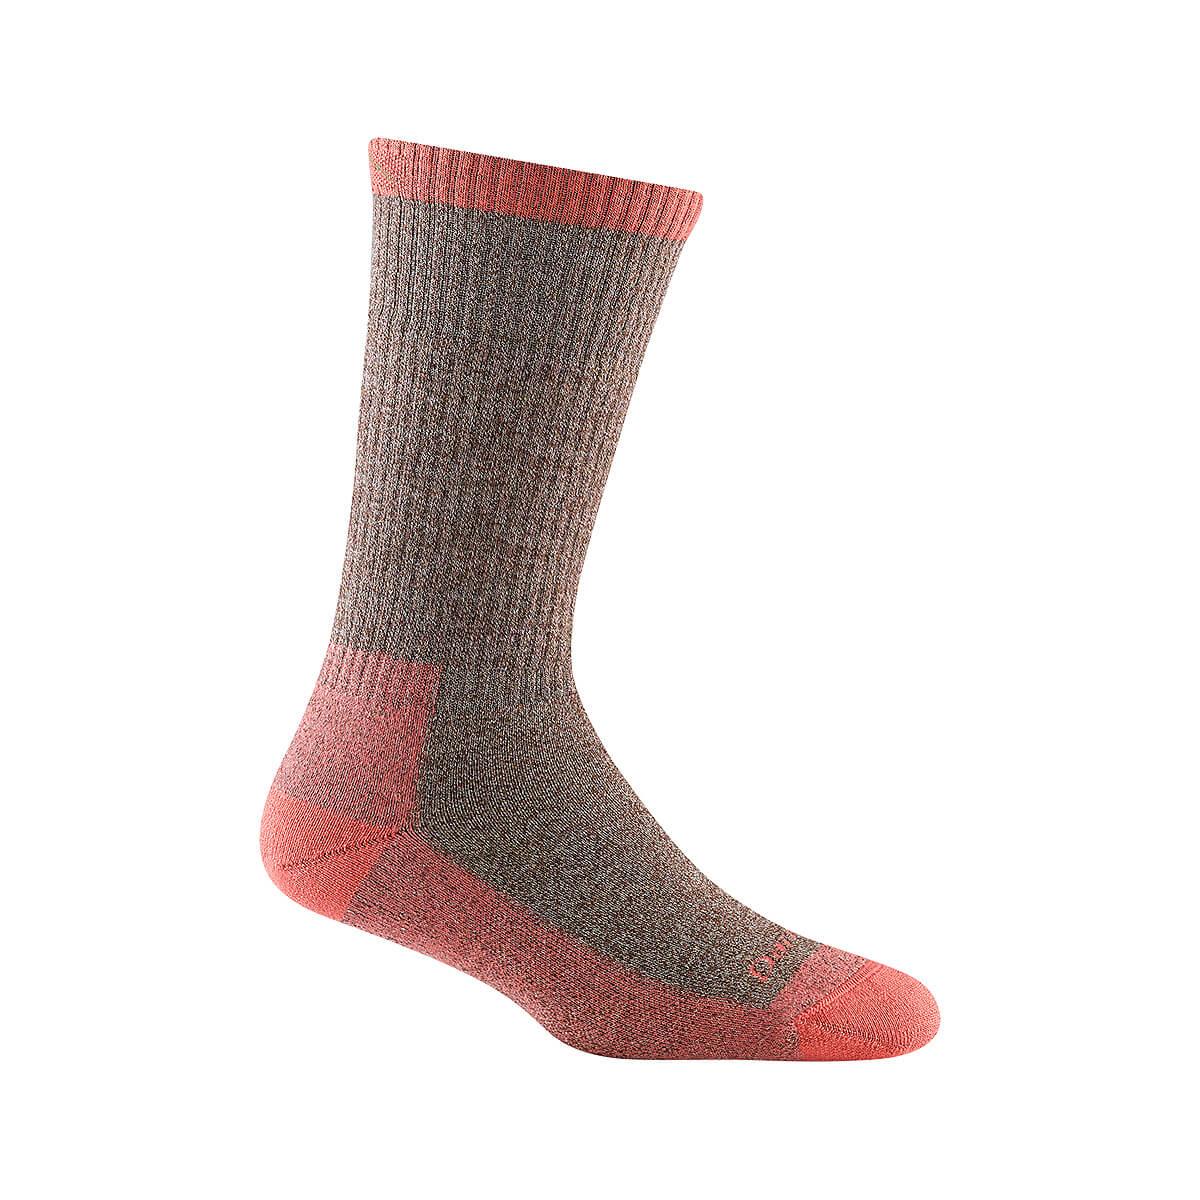  Women's Nomad Boot Midweight Hiking Socks